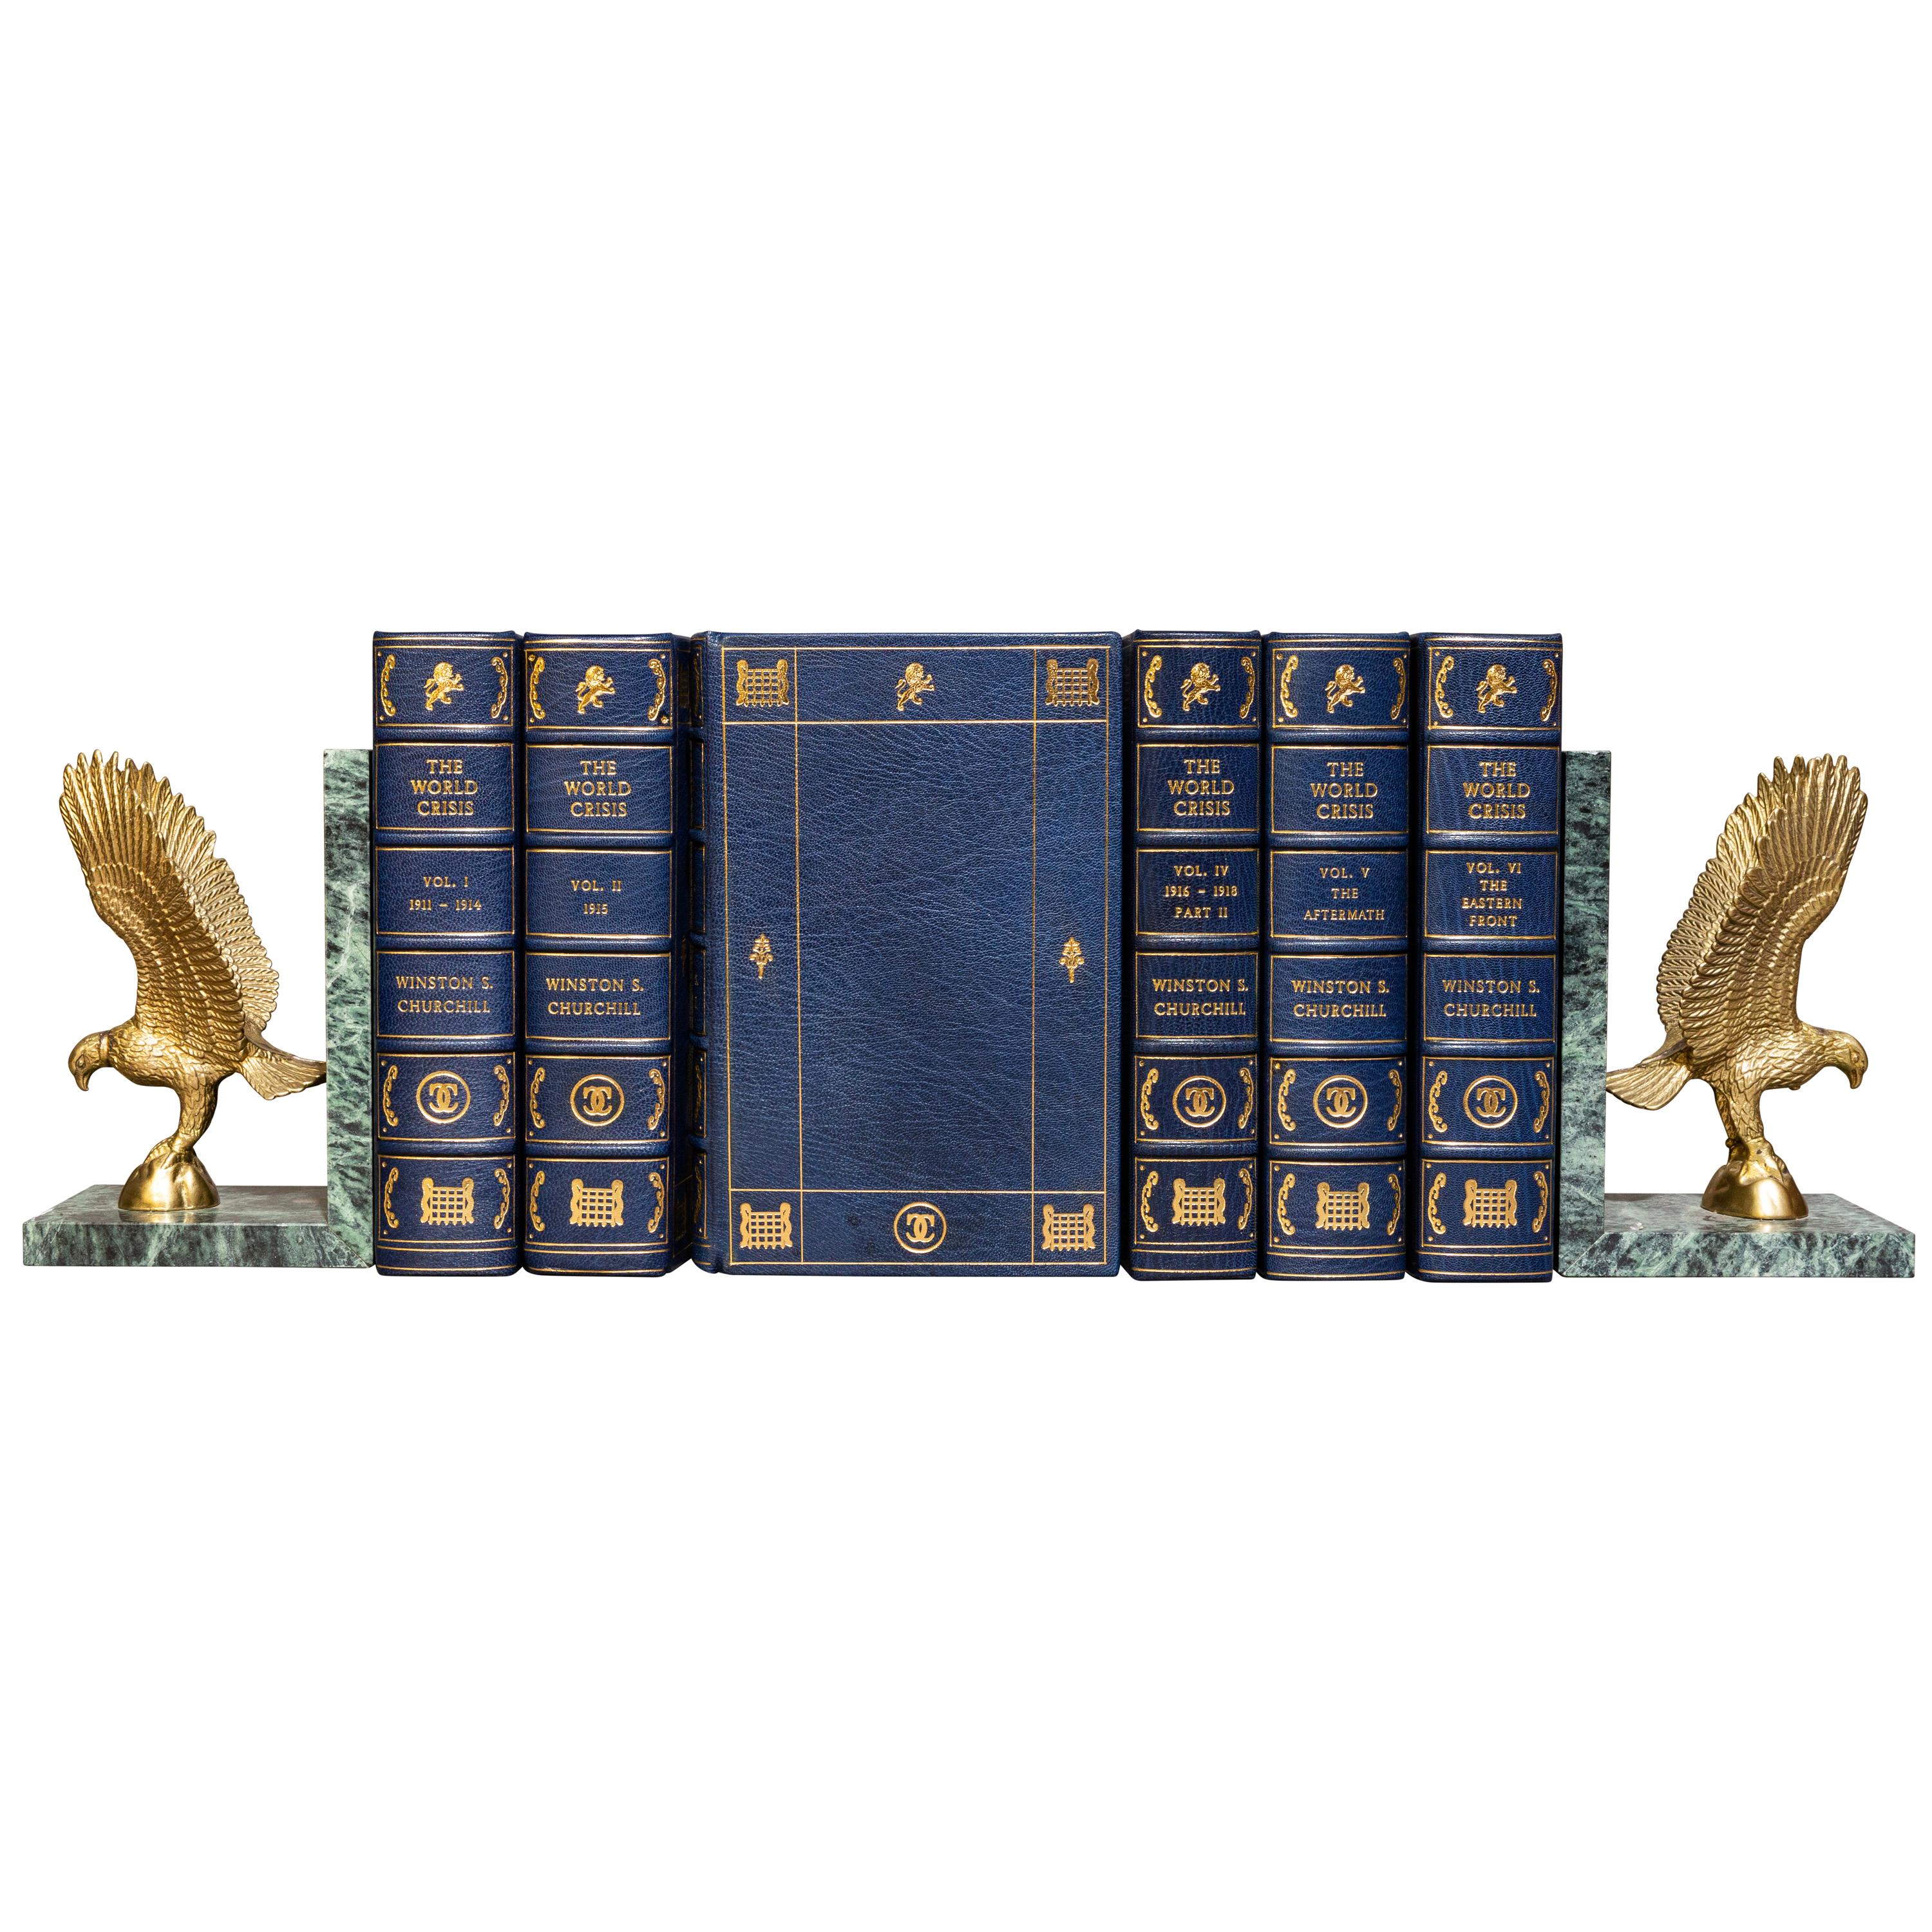 6 Volumes. Sir Winston S. Churchill. The World Crisis. Rebound in full blue morocco, all edges gilt, raised bands, ornate gilt on spines and covers, illustrated. Published: London: Thornton Butterworth Ltd.
1923-1931. First Editions.